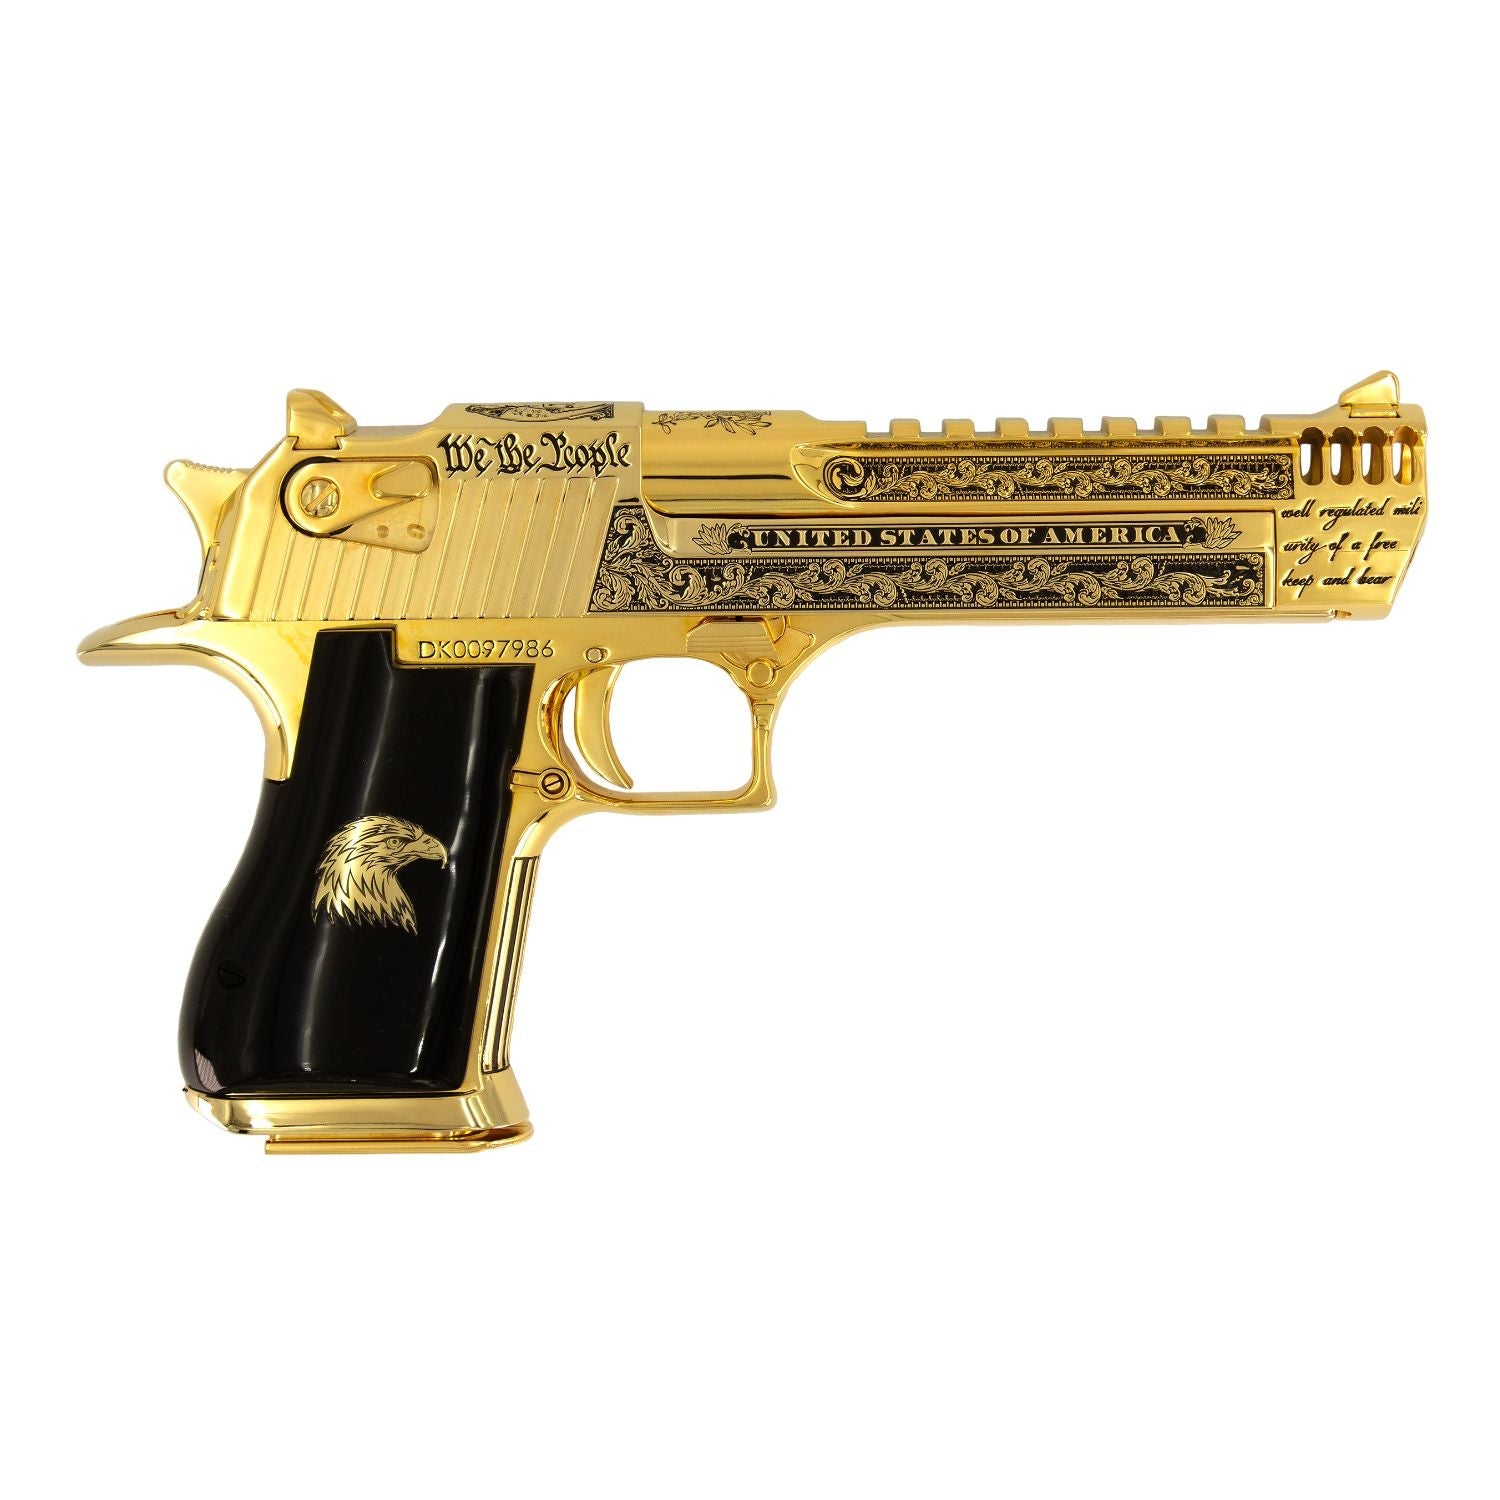 Magnum Research Desert Eagle Patriot 50 AE, 6", 24kt Gold Plated and Engraved, 7010459353190, 761226022350